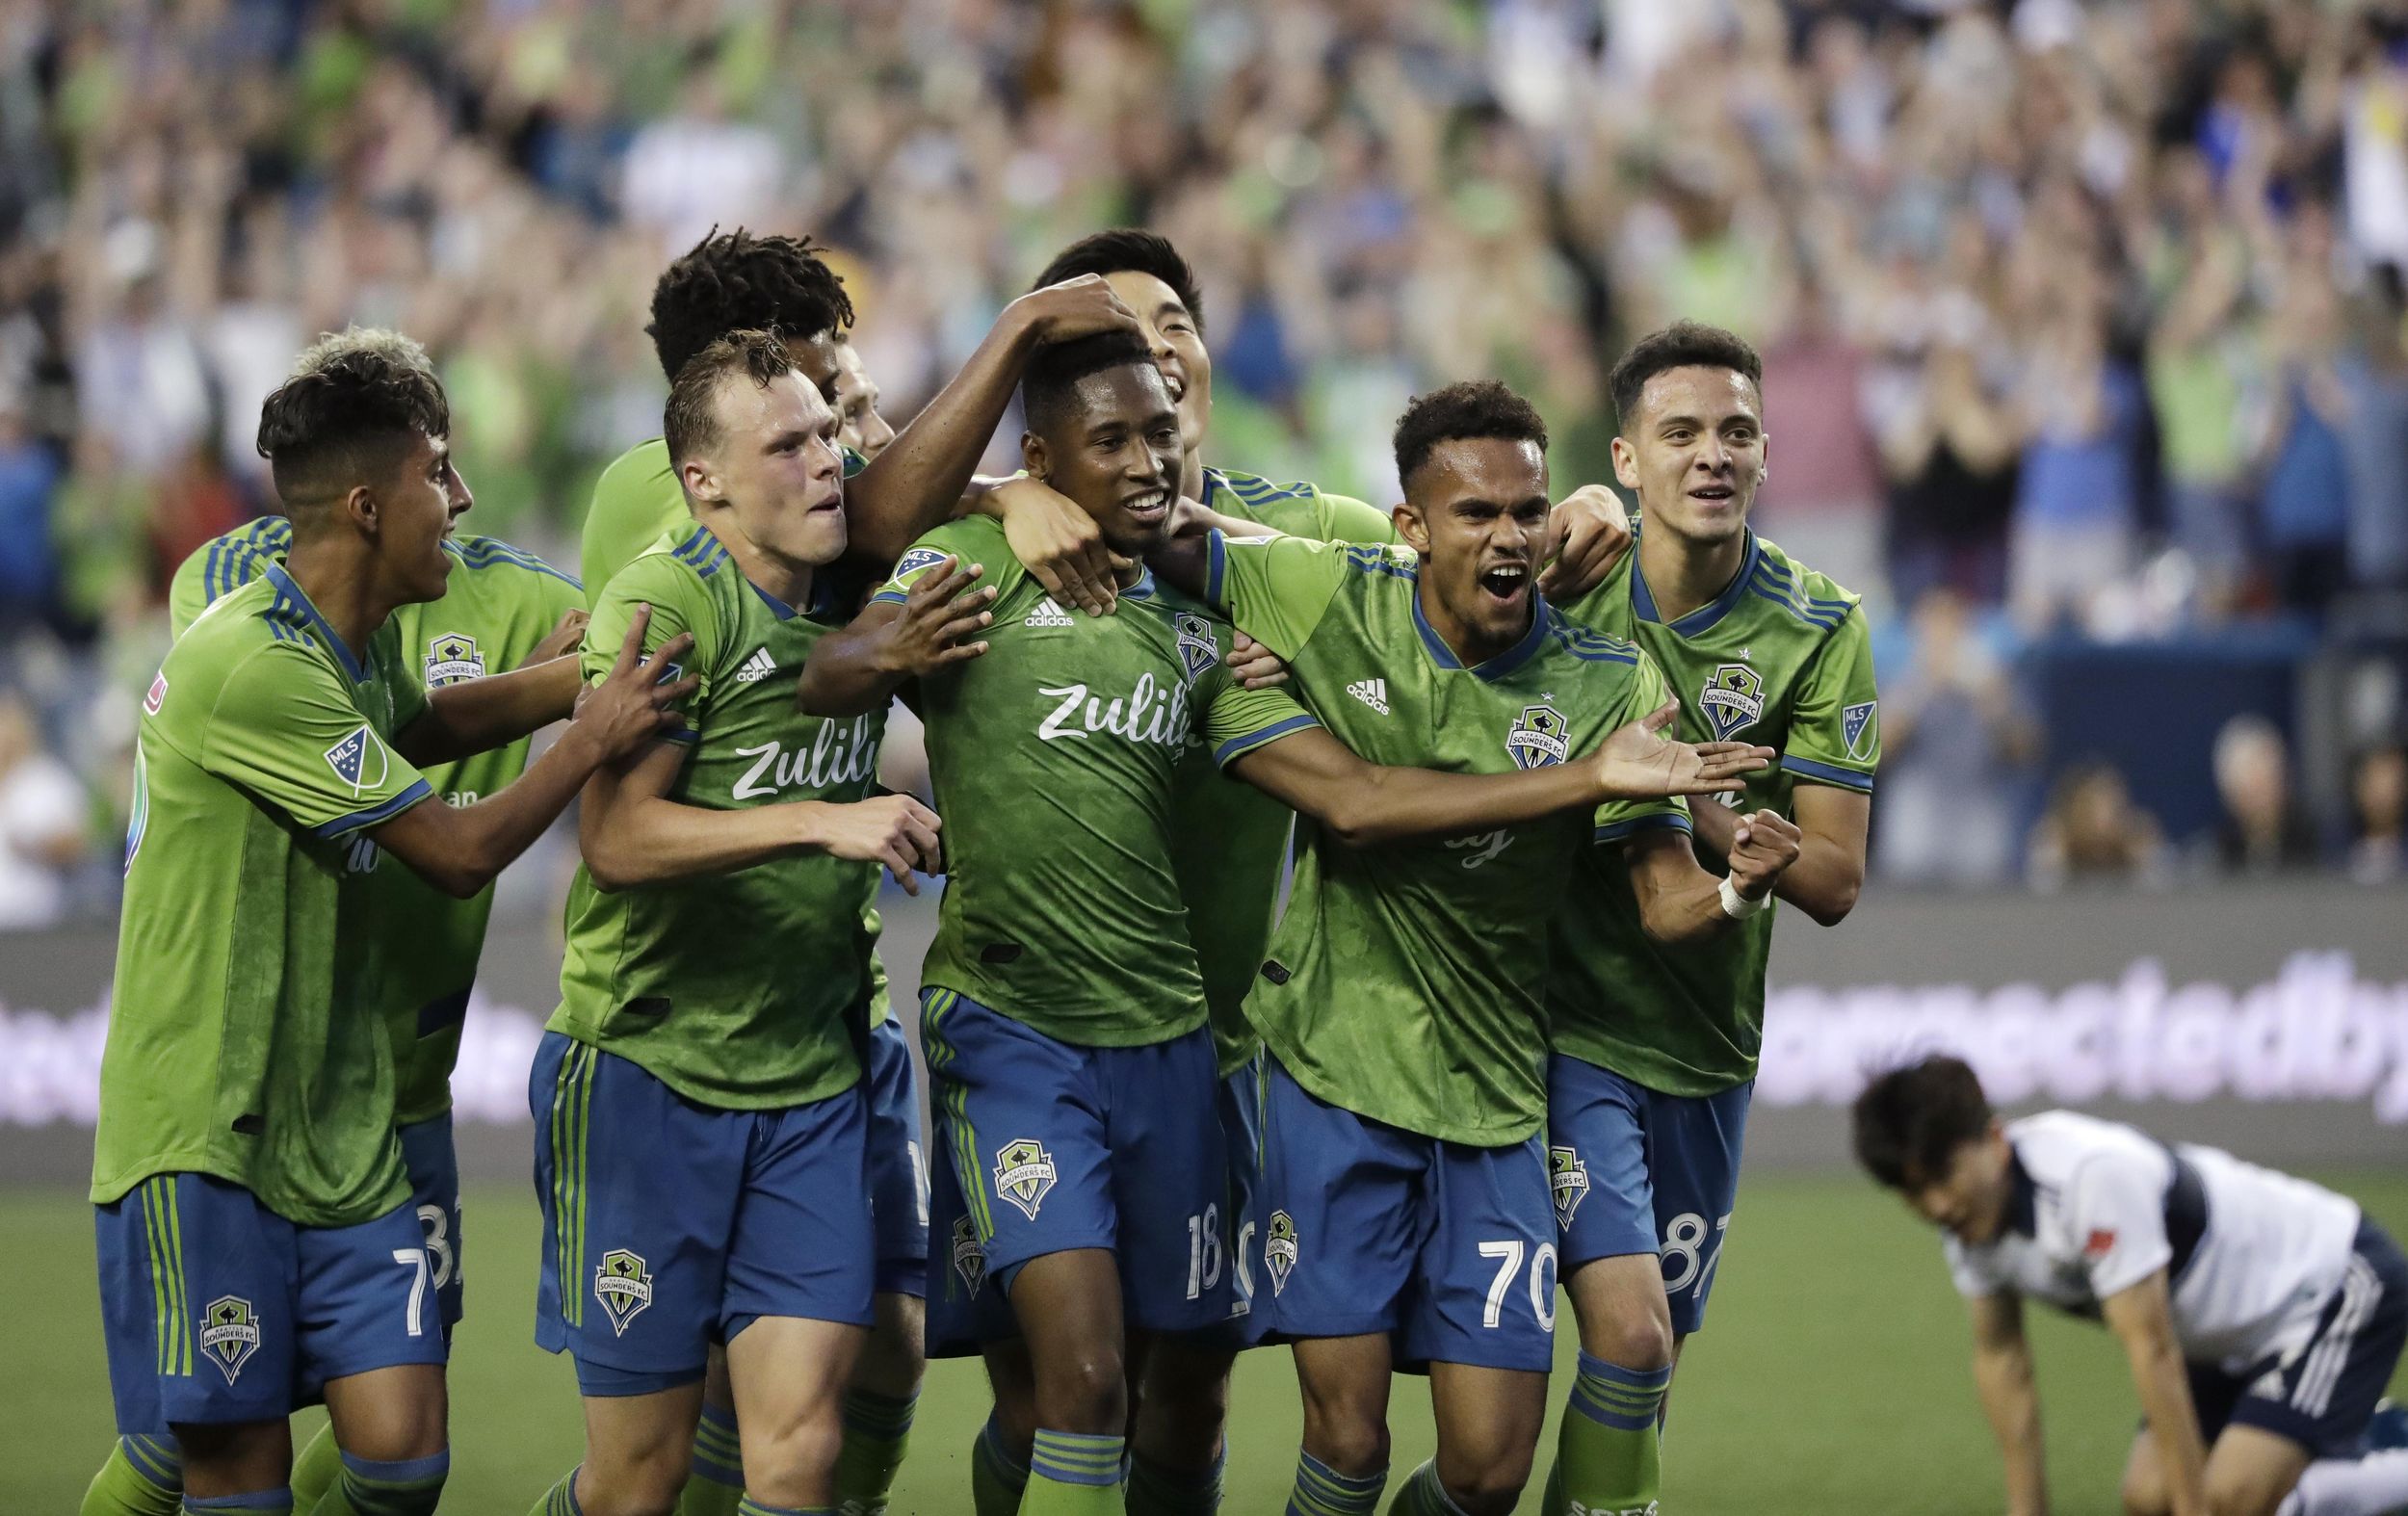 Back to a full roster, the Sounders look to dethrone defending MLS Cup